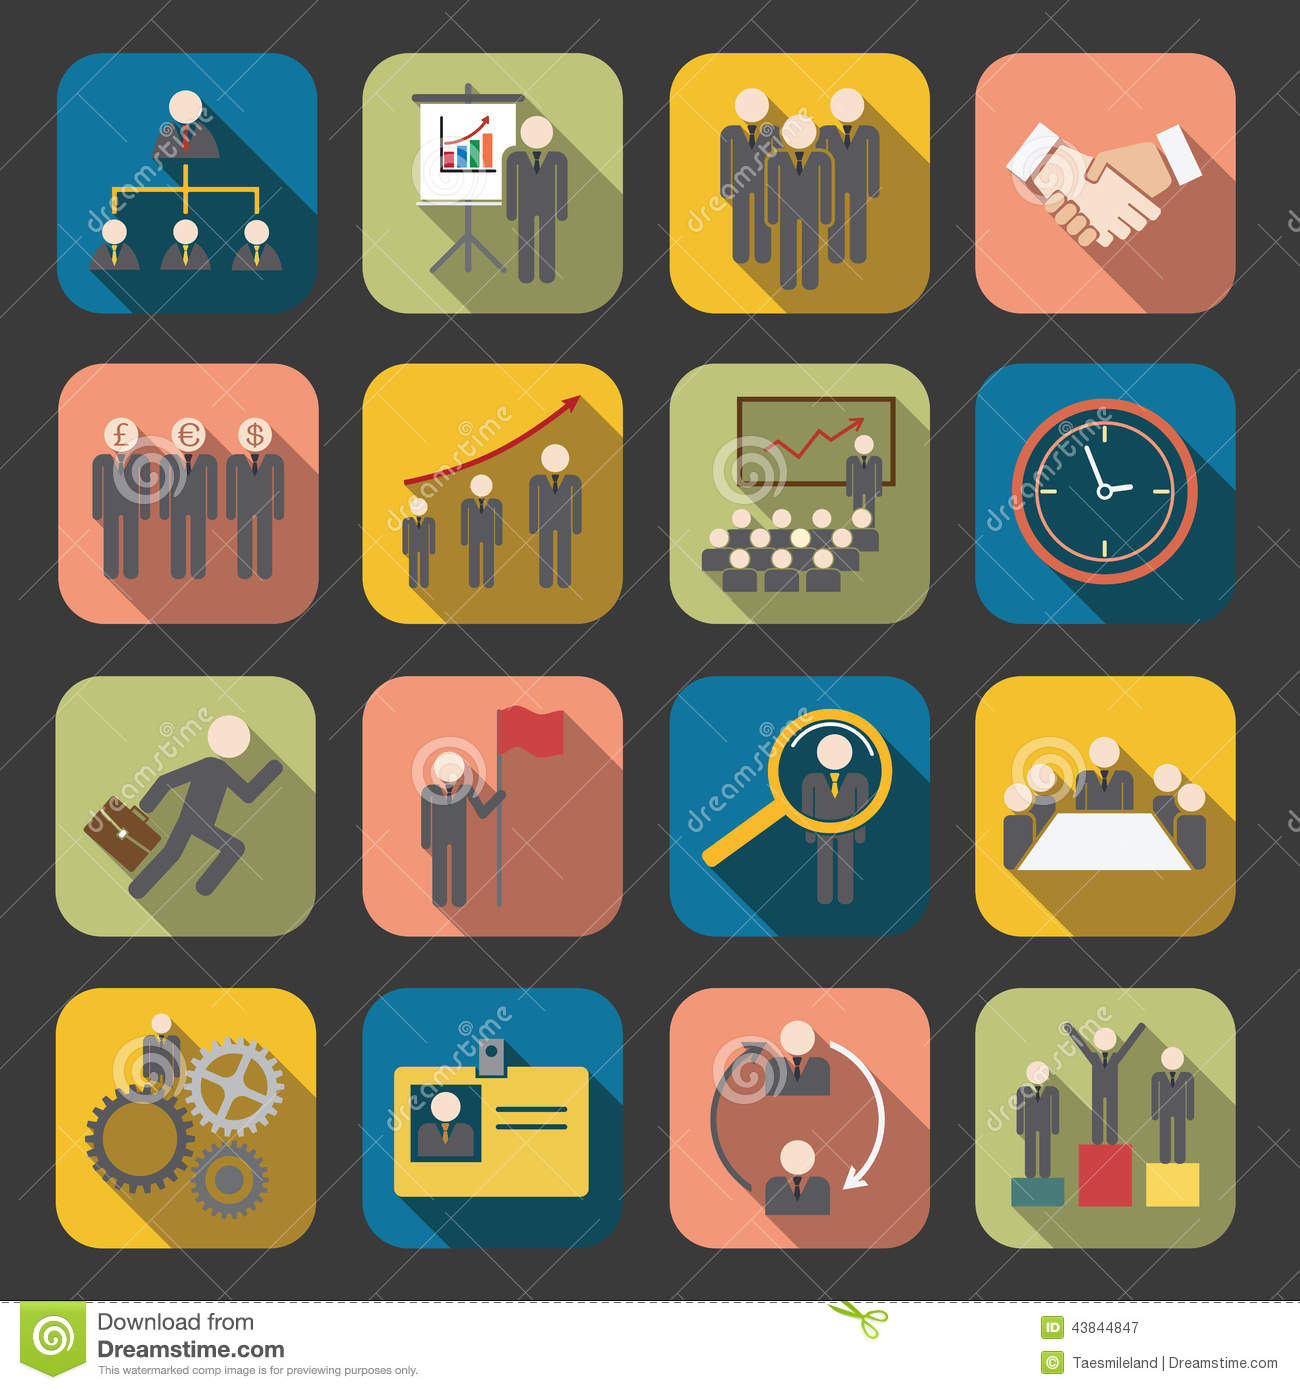 Human Resources Flat Icons